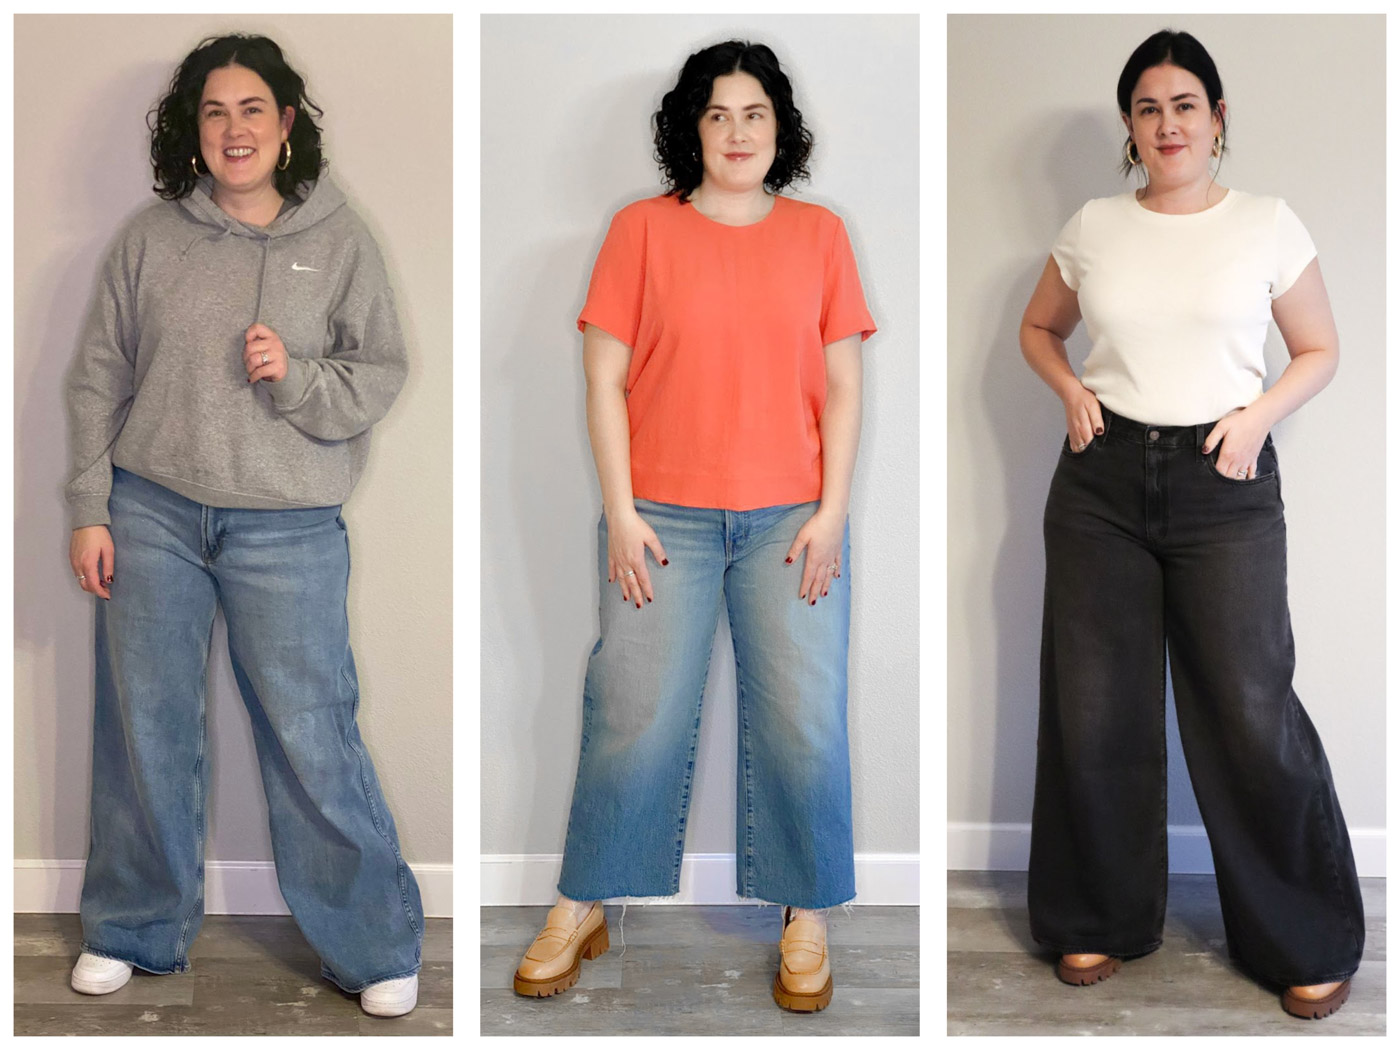 Huge-Leg Denims For Curves: I Tried 13 Pairs From Madewell, Levi’s, AGOLDE & Extra